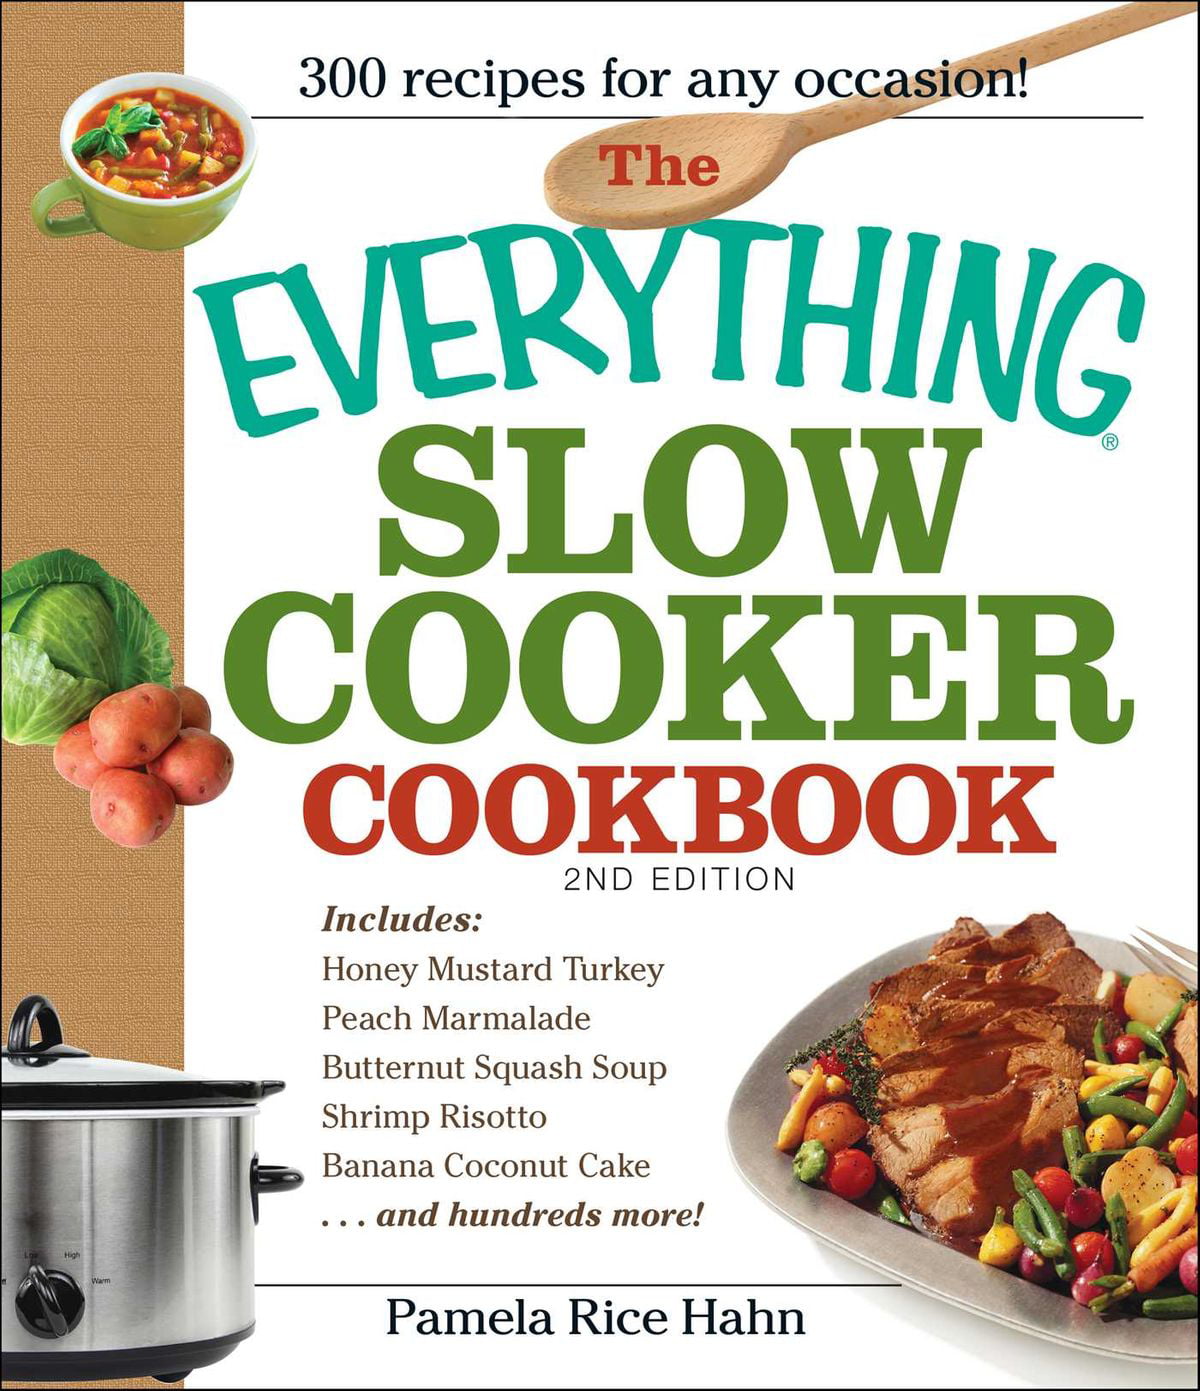 The Everything Slow Cooker Cookbook, 2nd Edition - eBook - Walmart.com ...